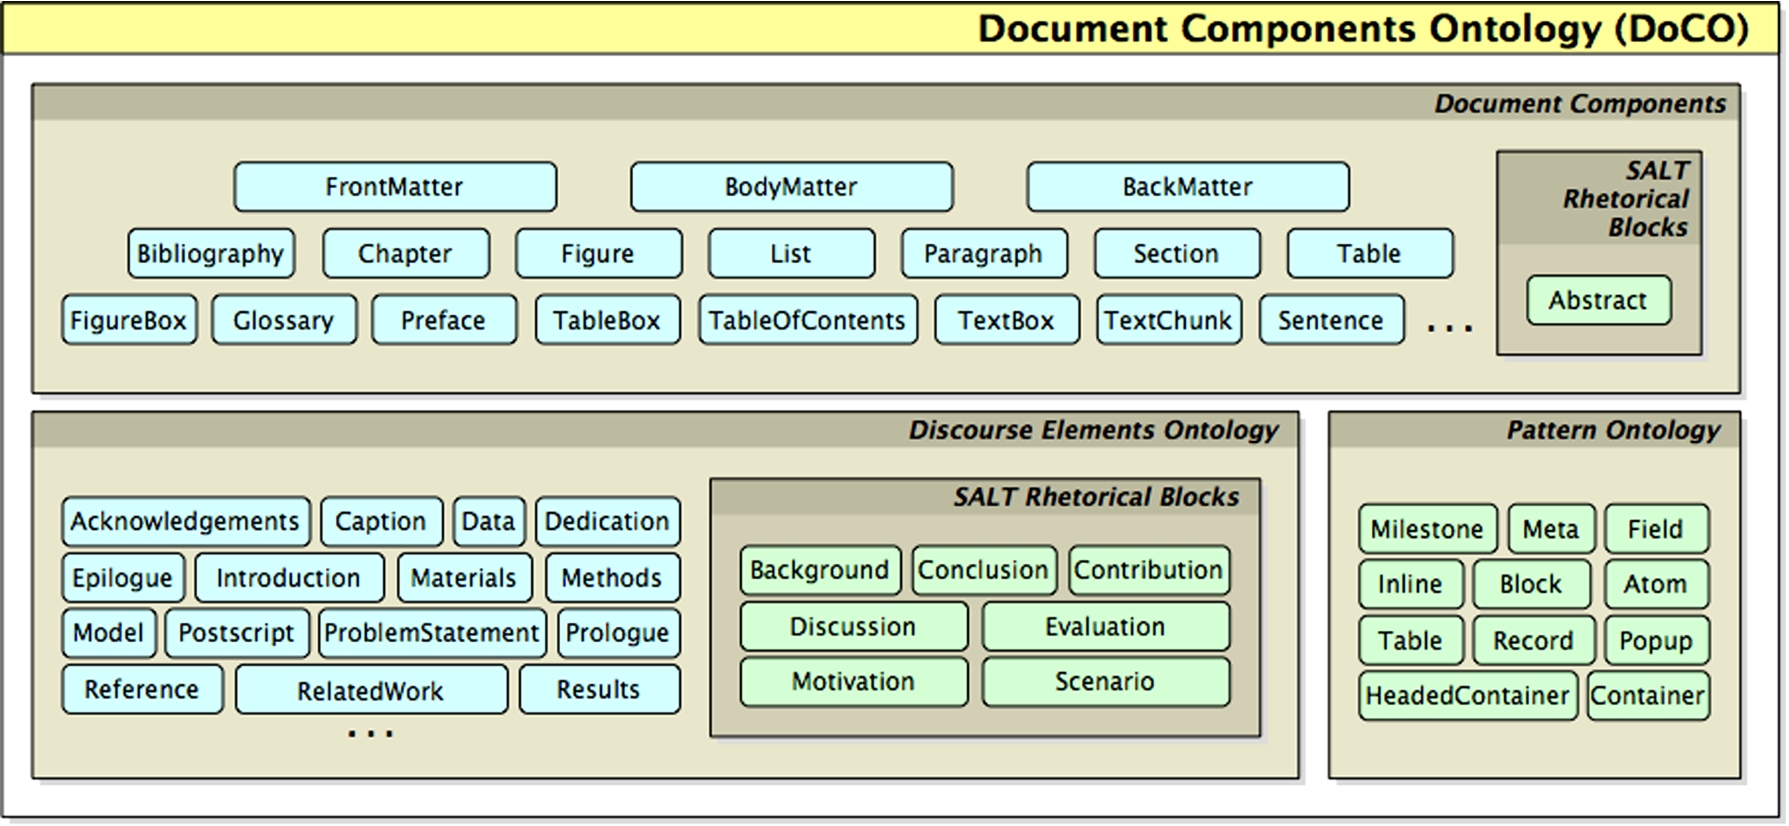 Diagram describing the composition and the classes of the Document Components Ontology (DoCO). Note that only 22 of the 31 DEO classes are shown. For a full list of all the DEO classes and their definitions, see the ontology itself at http://purl.org/spar/deo.